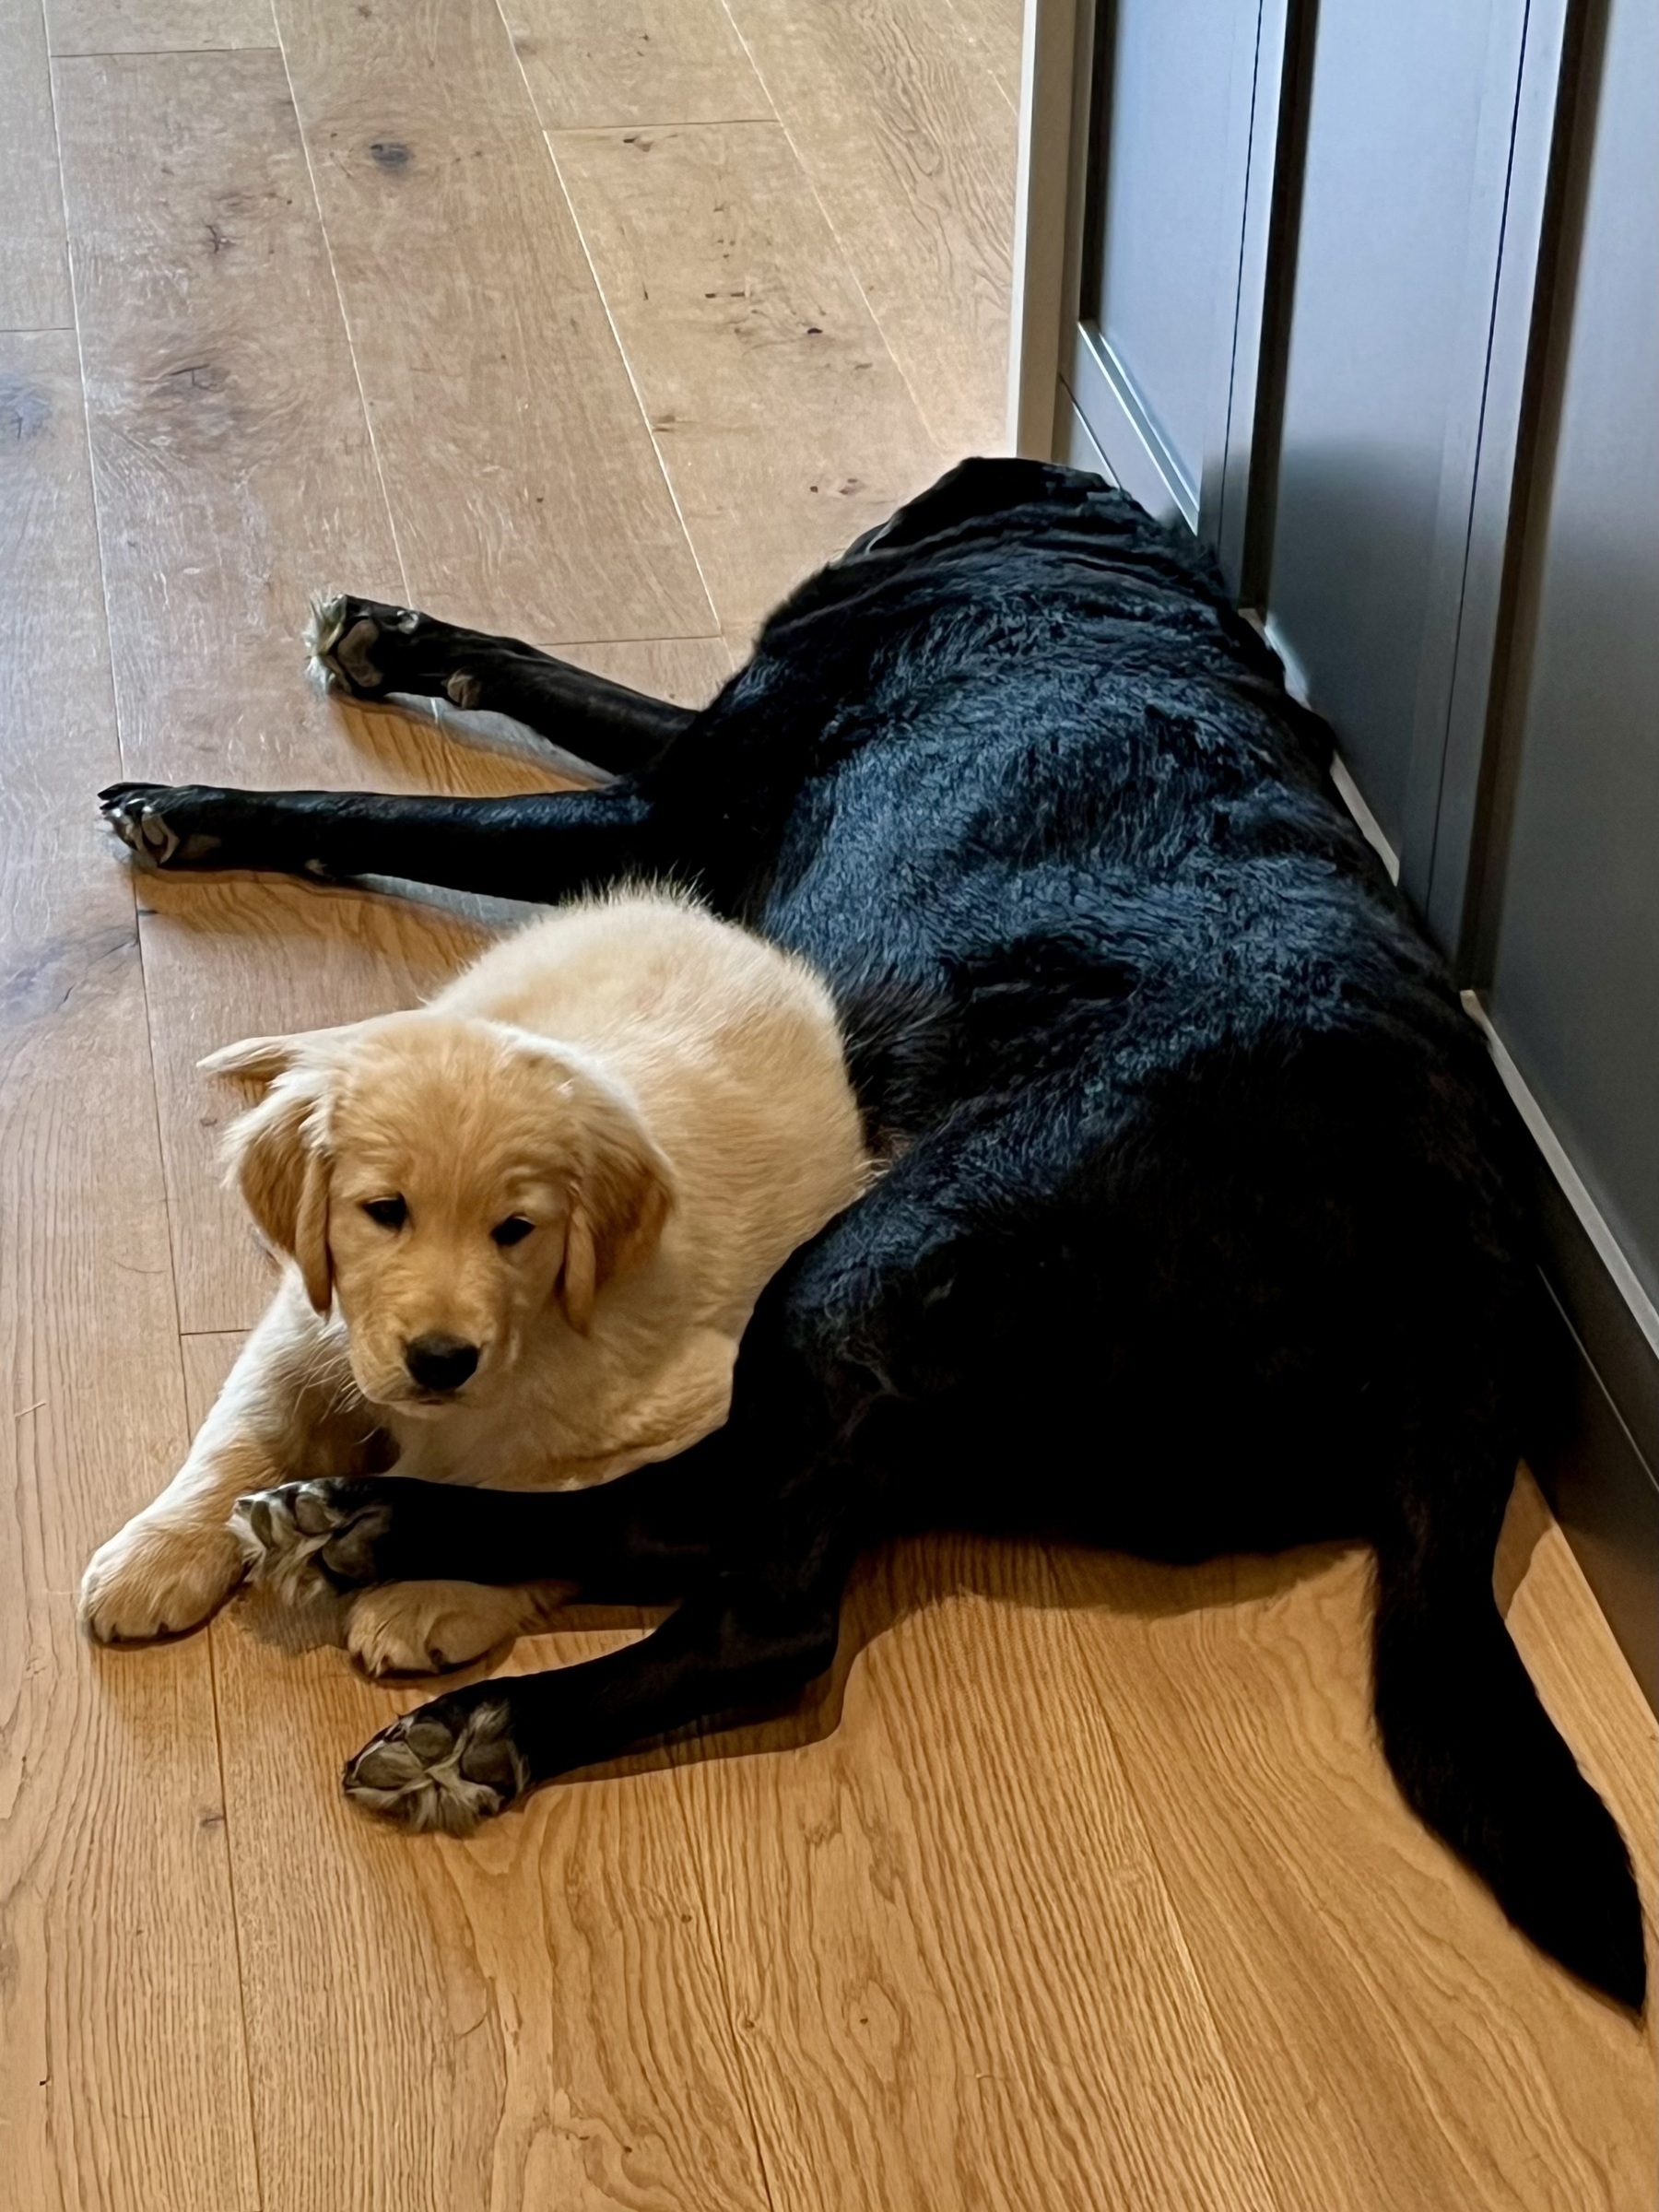 A light-colored puppy is resting next to a larger black dog on a wooden floor.